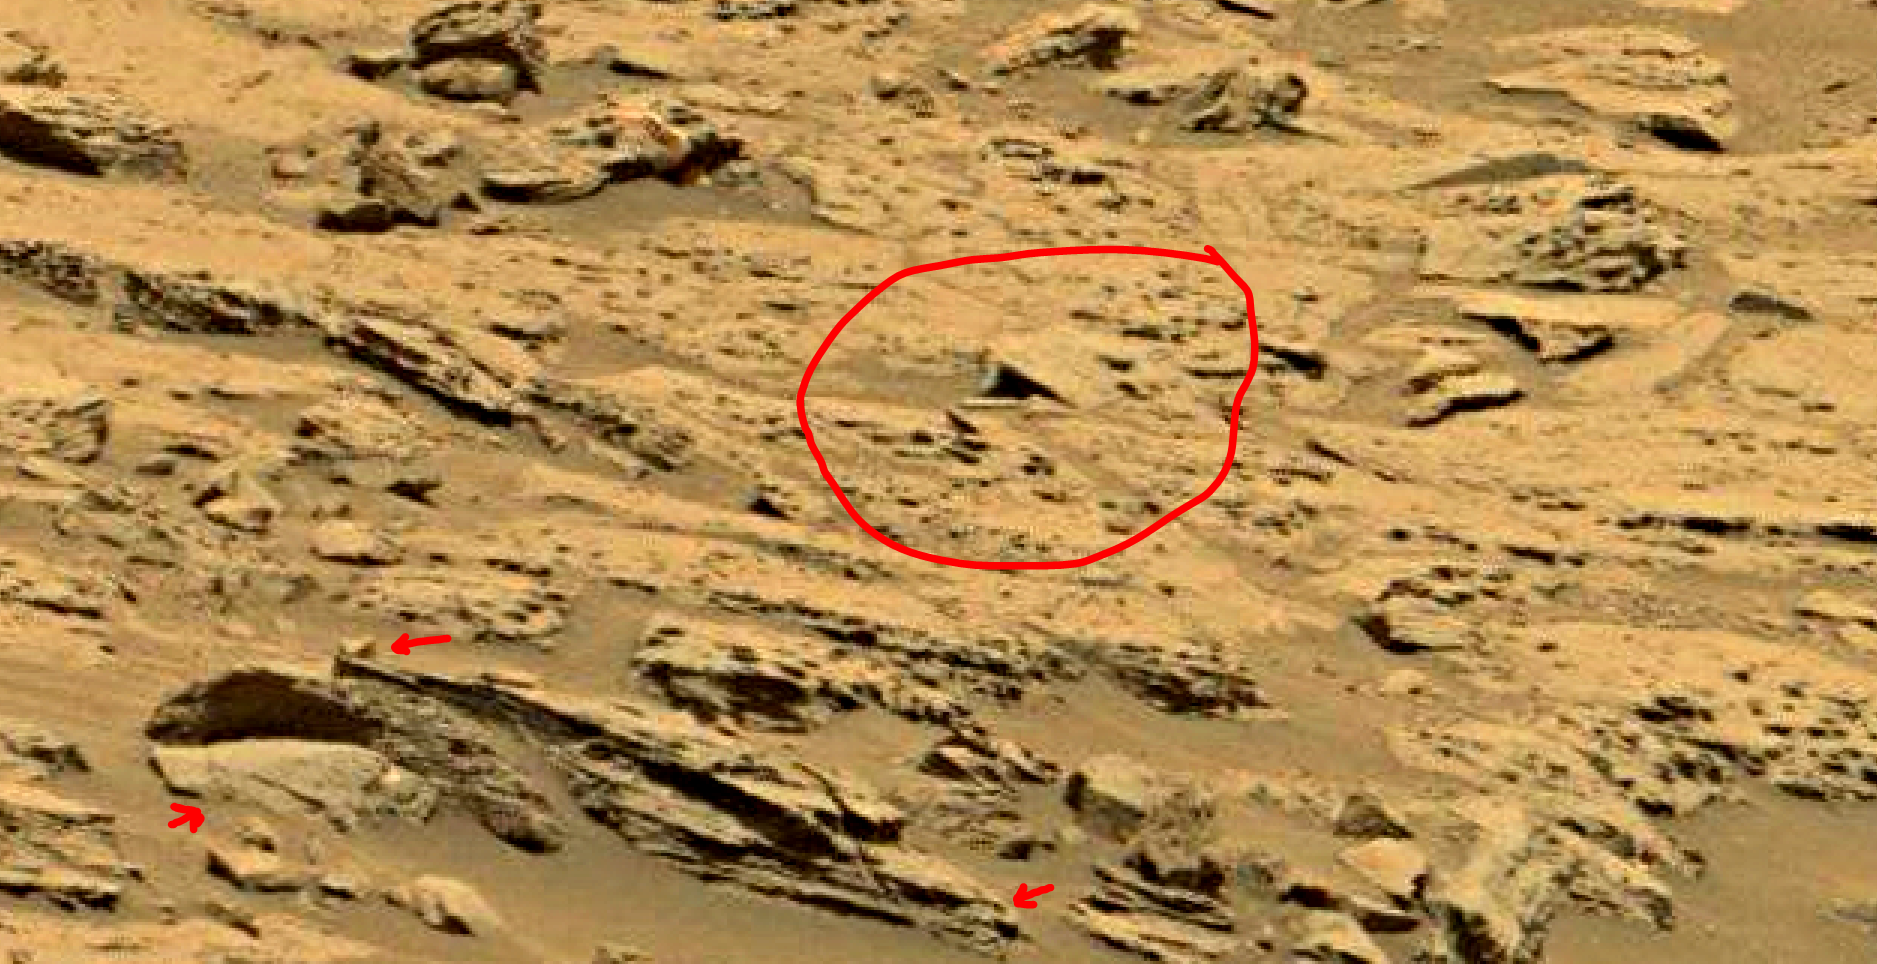 mars sol 1353 anomaly-artifacts 50 was life on mars